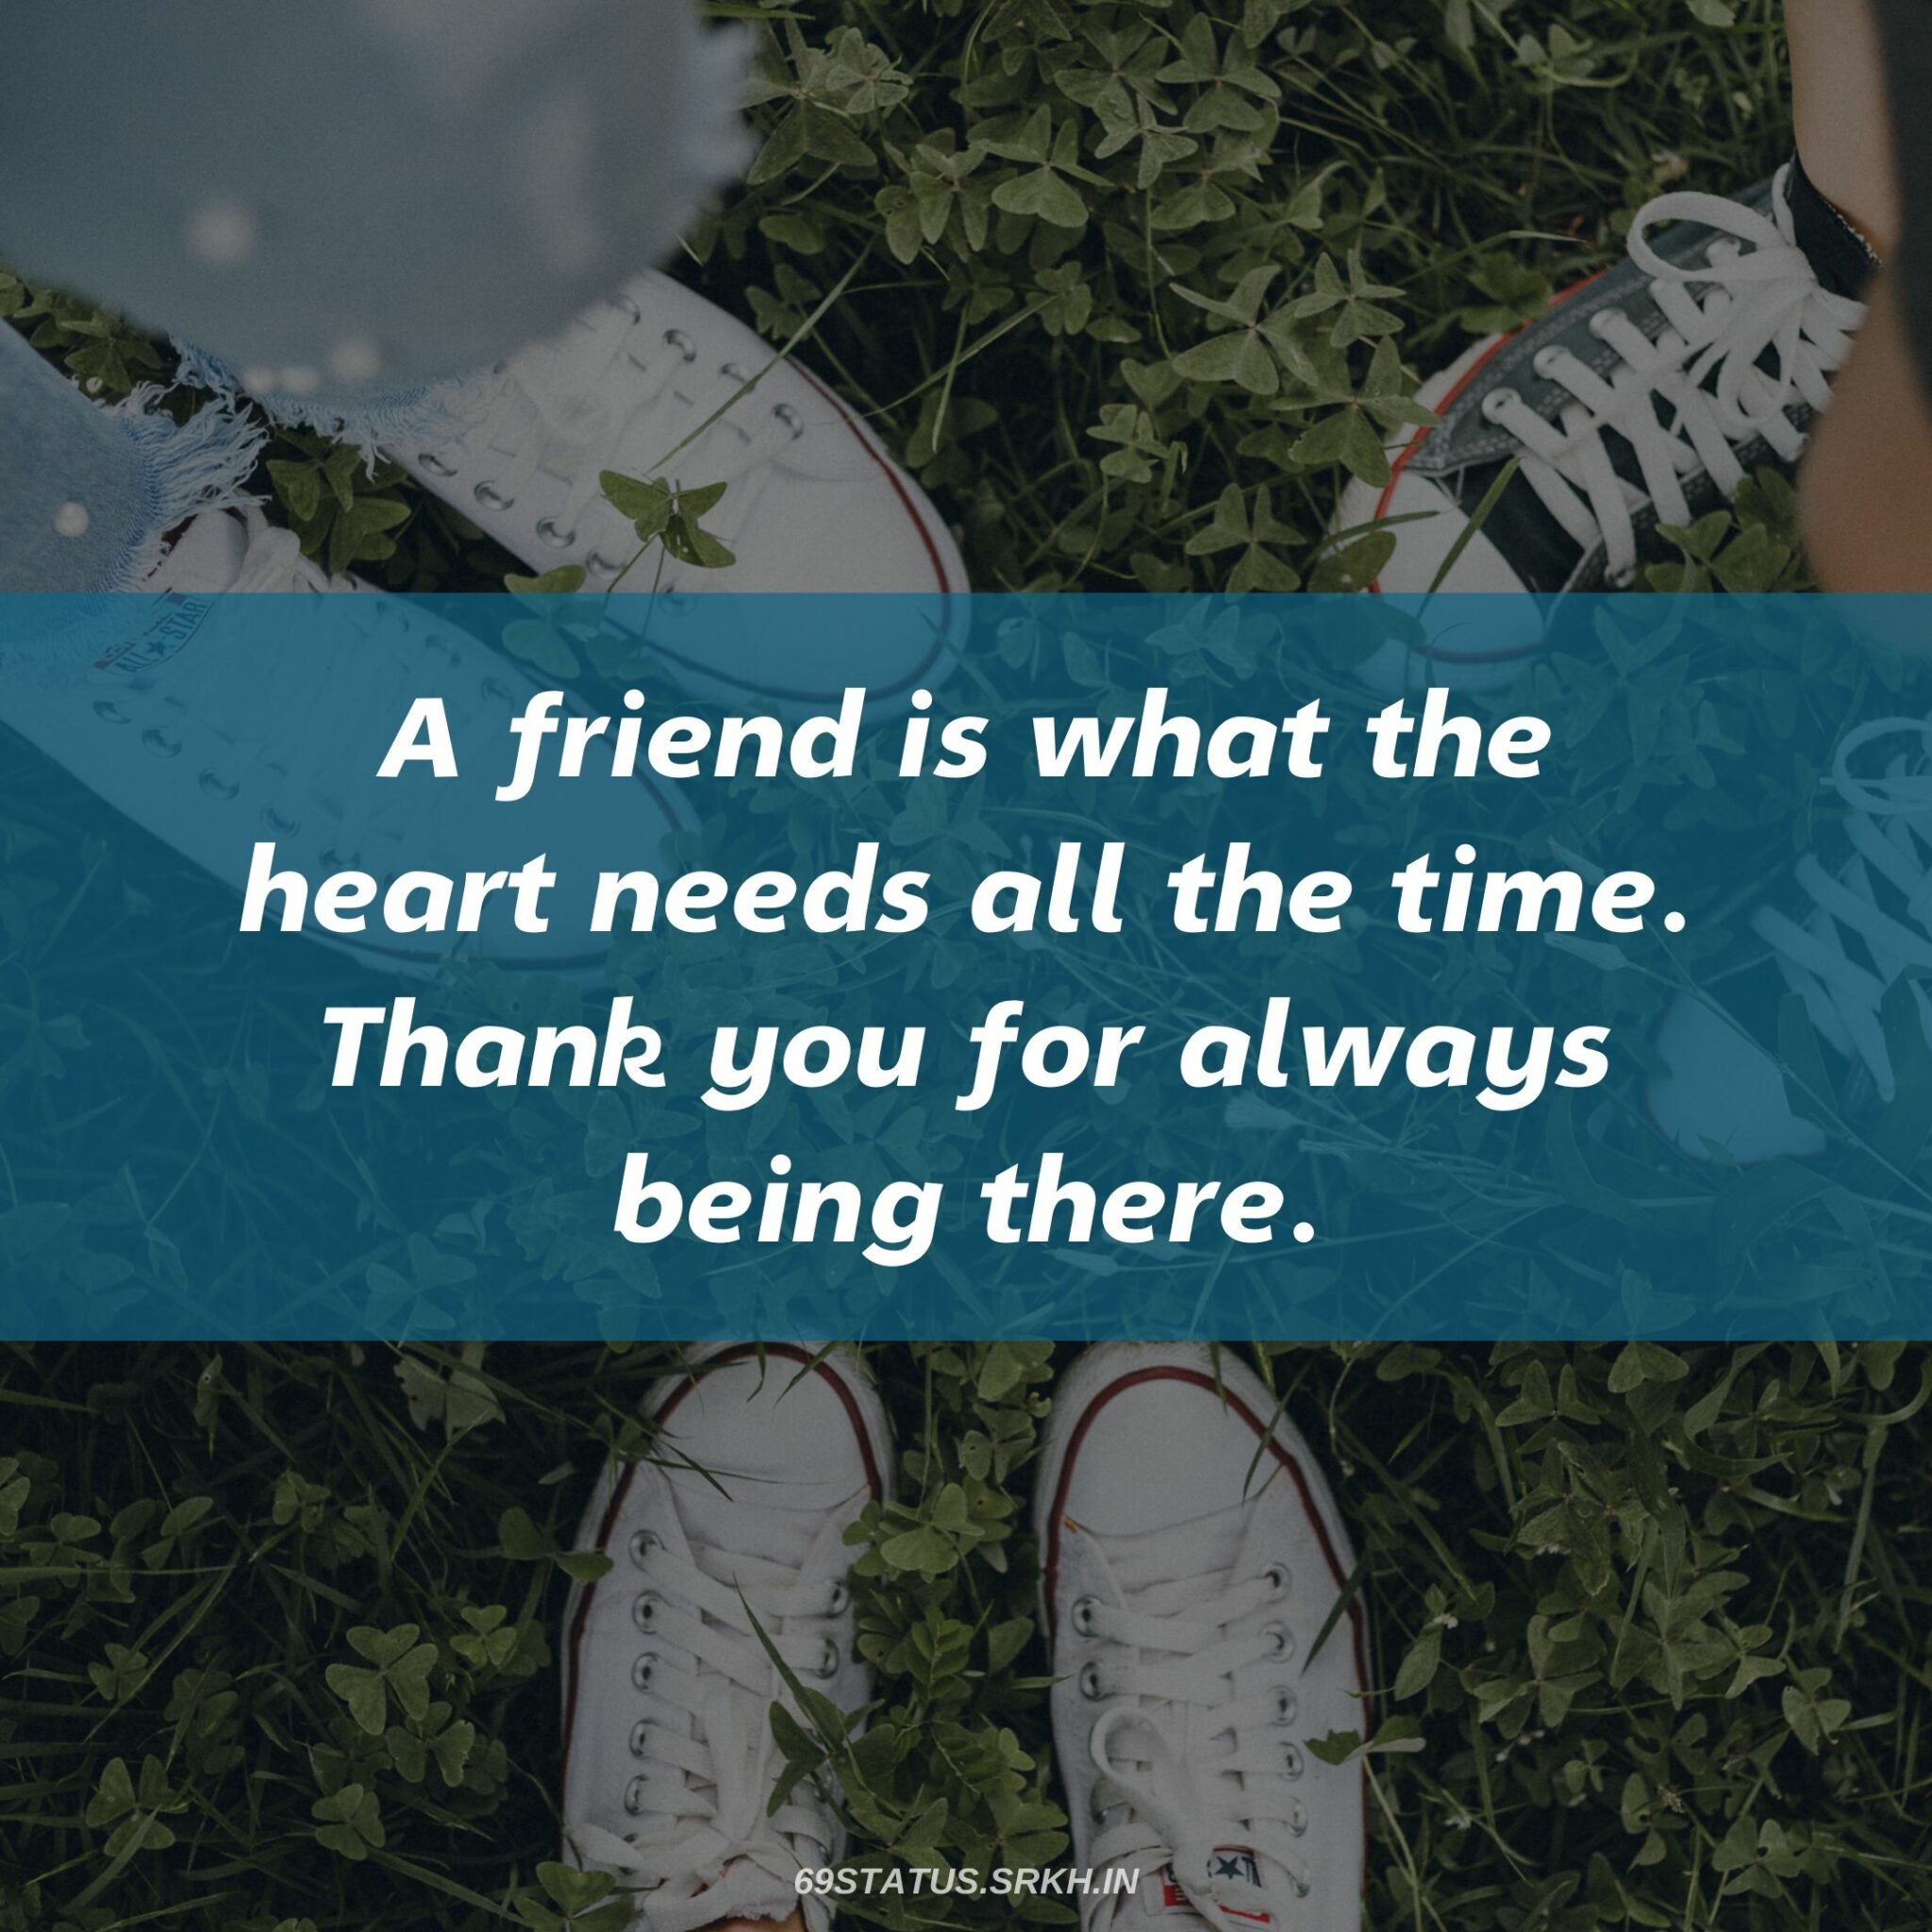 Thank You Images for Friends – A friend is what the heart needs all the time Thank you for always being there